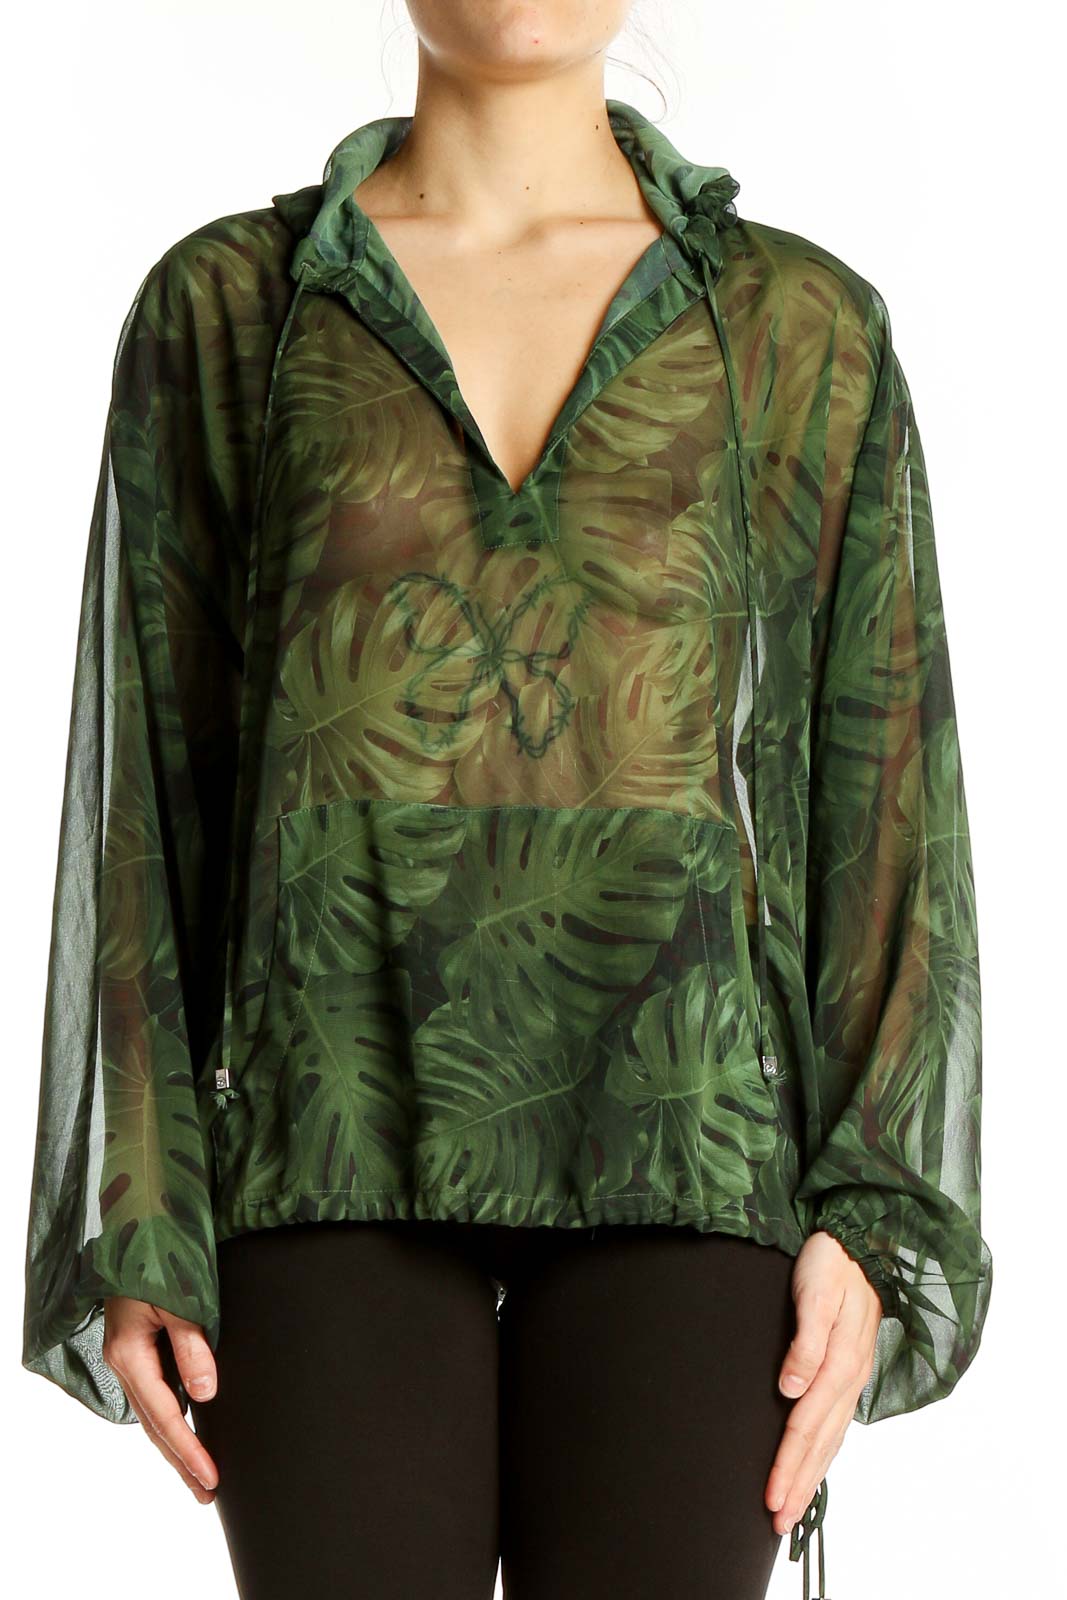 Green Print Transparent Hooded Top Front